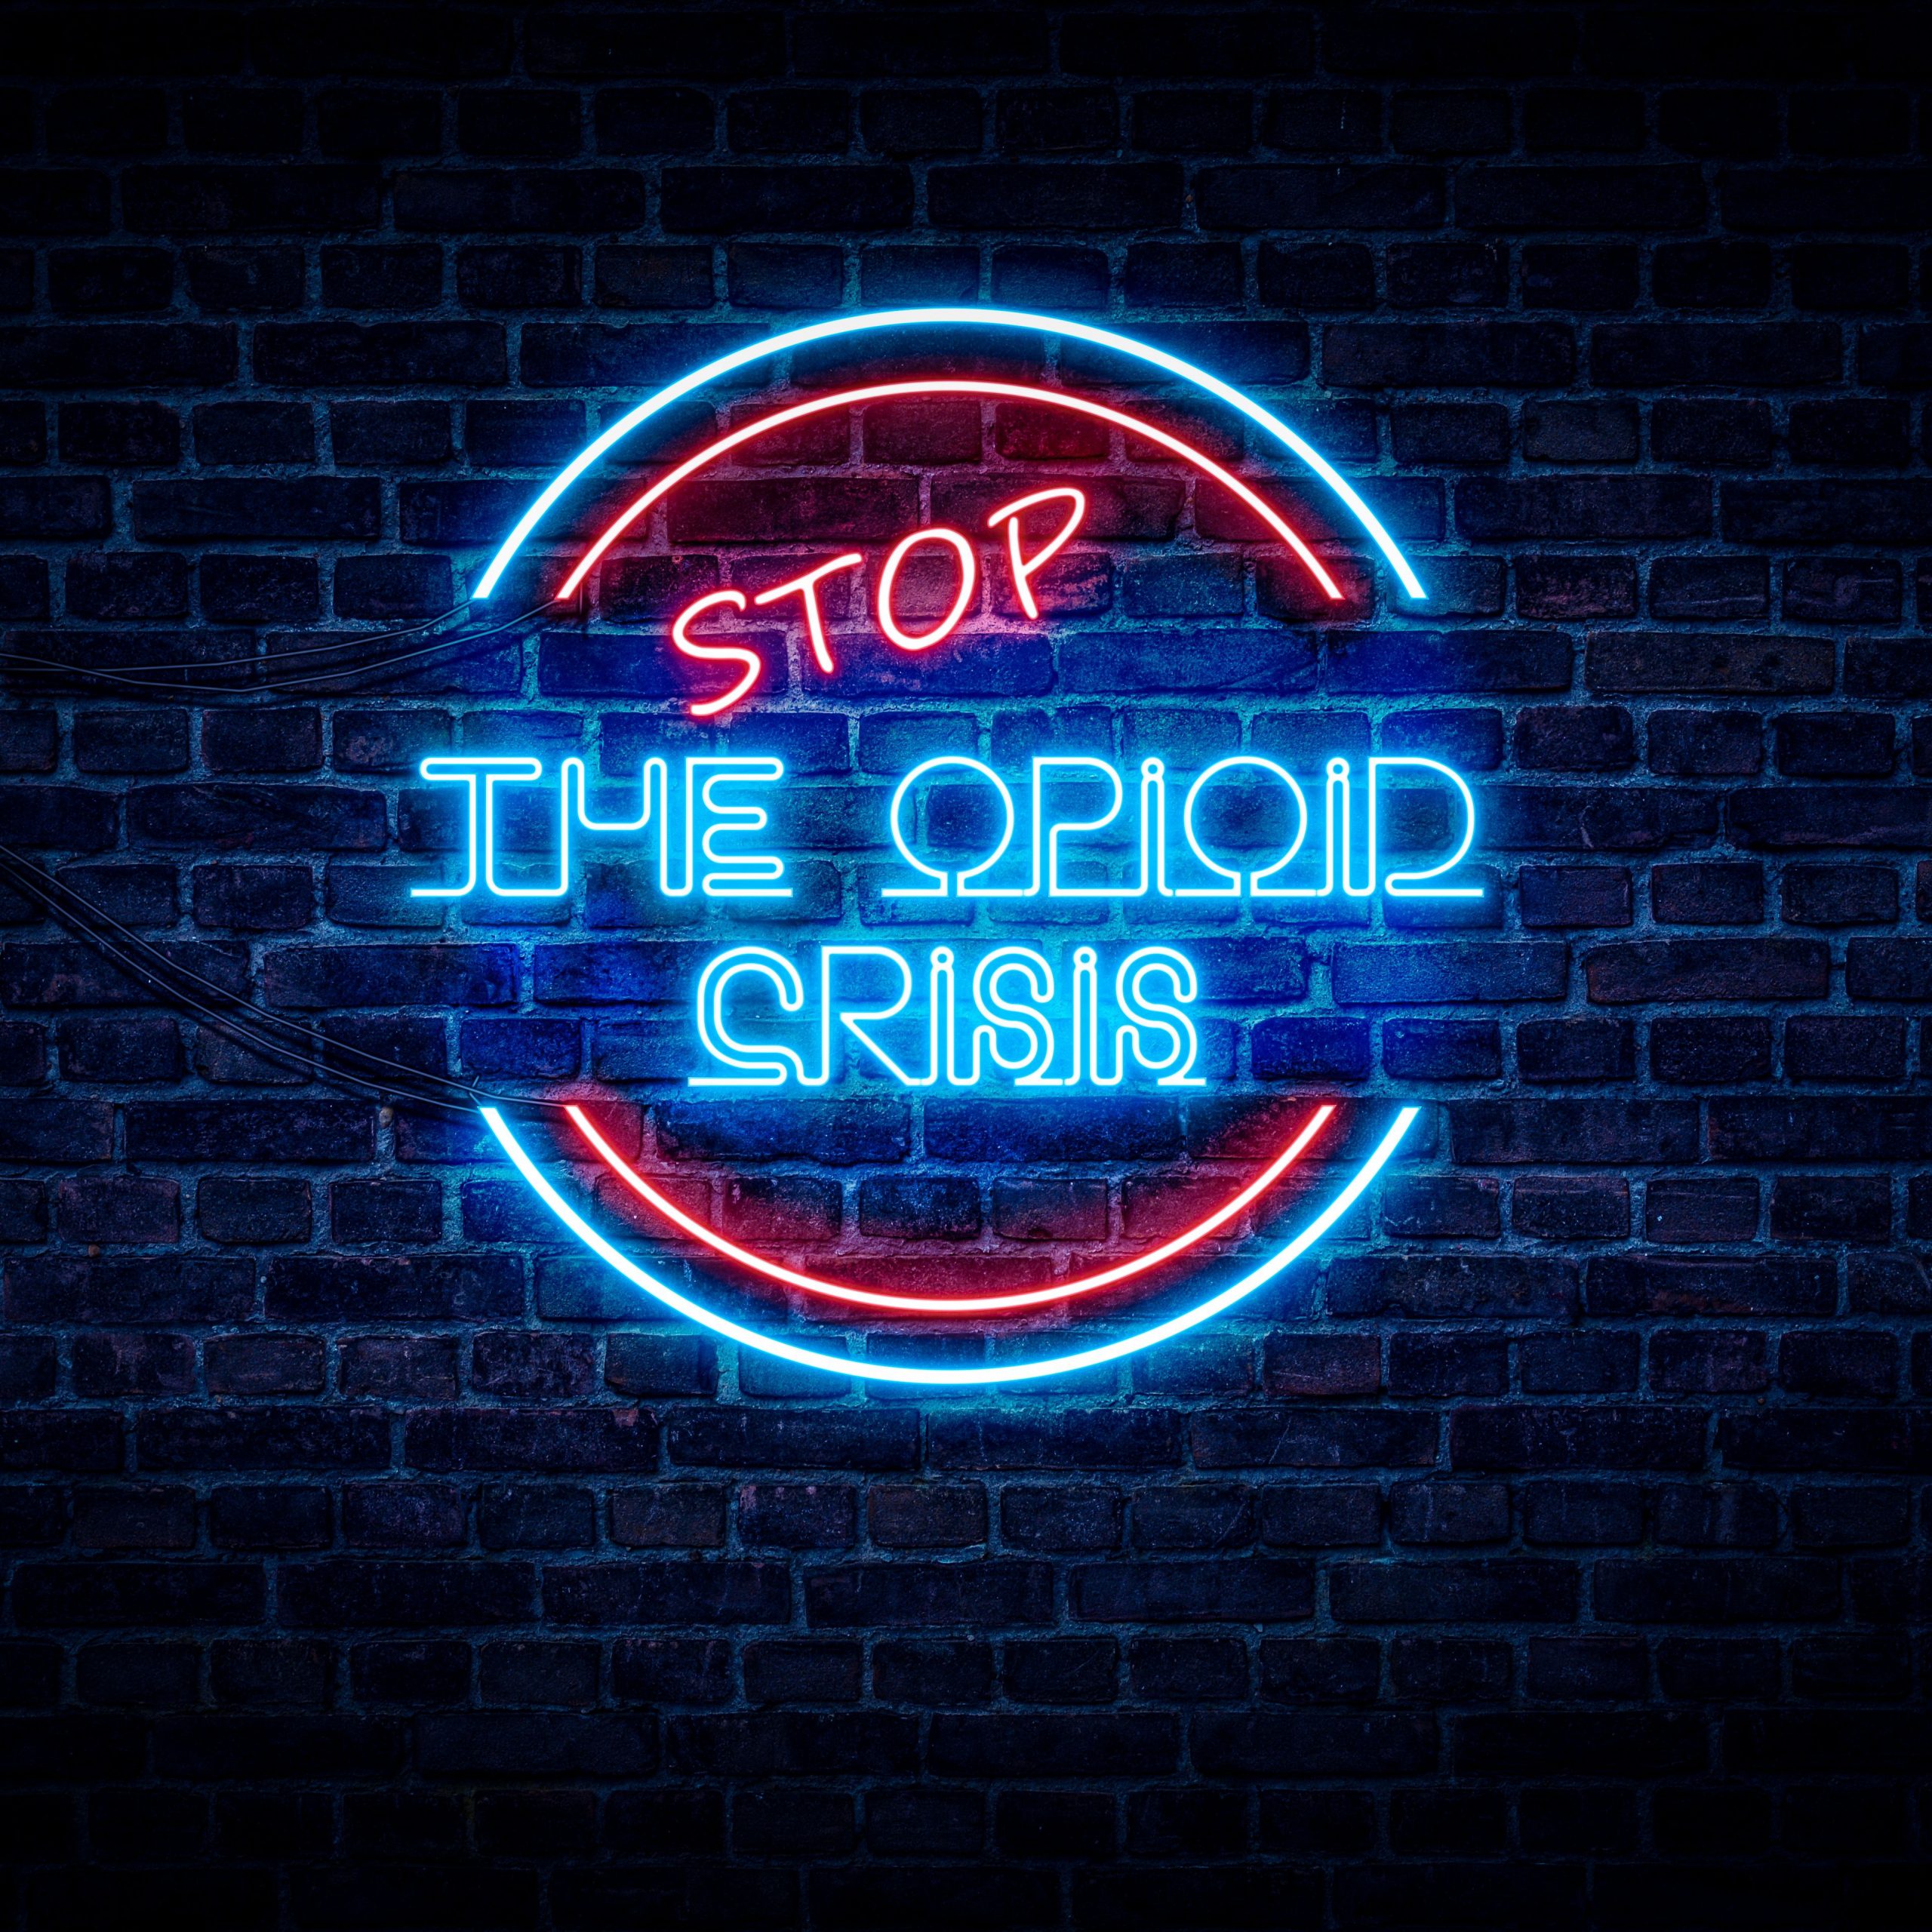 neon sign reads "Stop the opioid crisis"